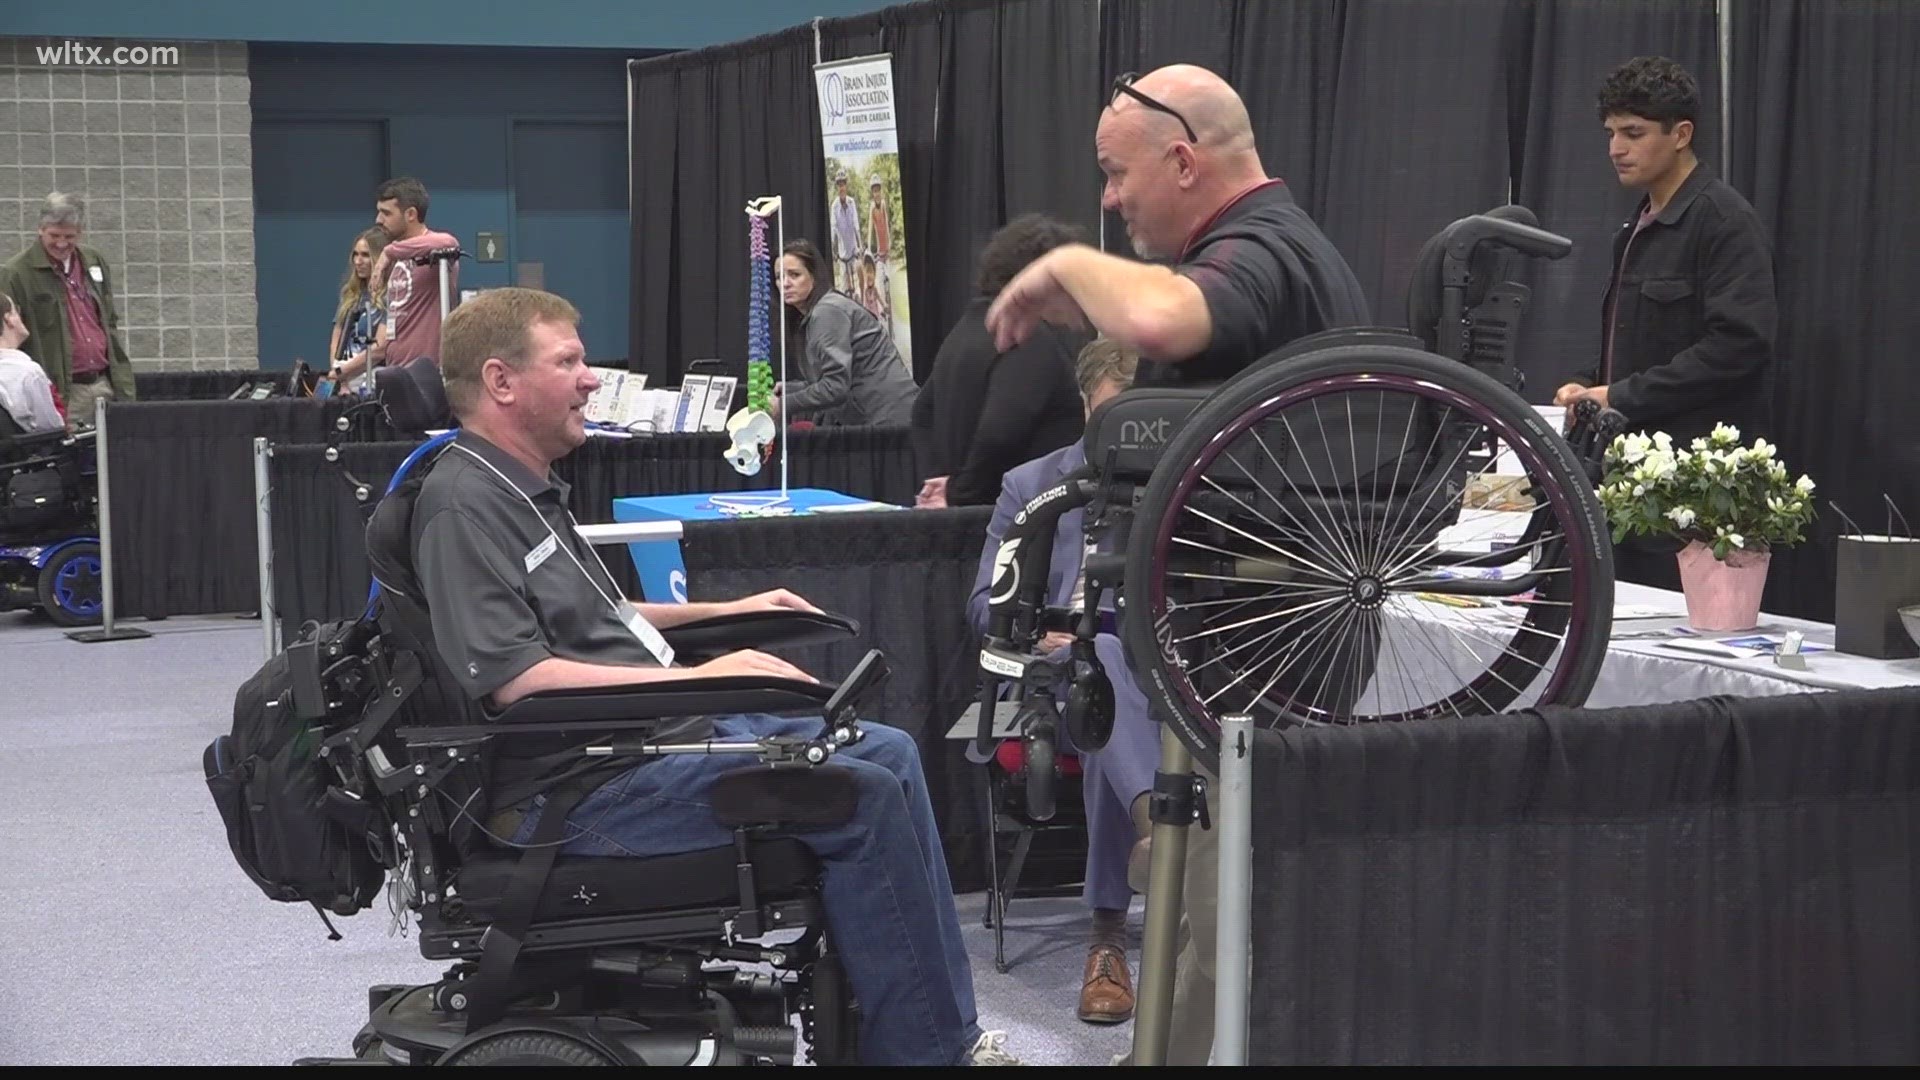 Things like smart glasses, wheelchairs and other high tech was on display.